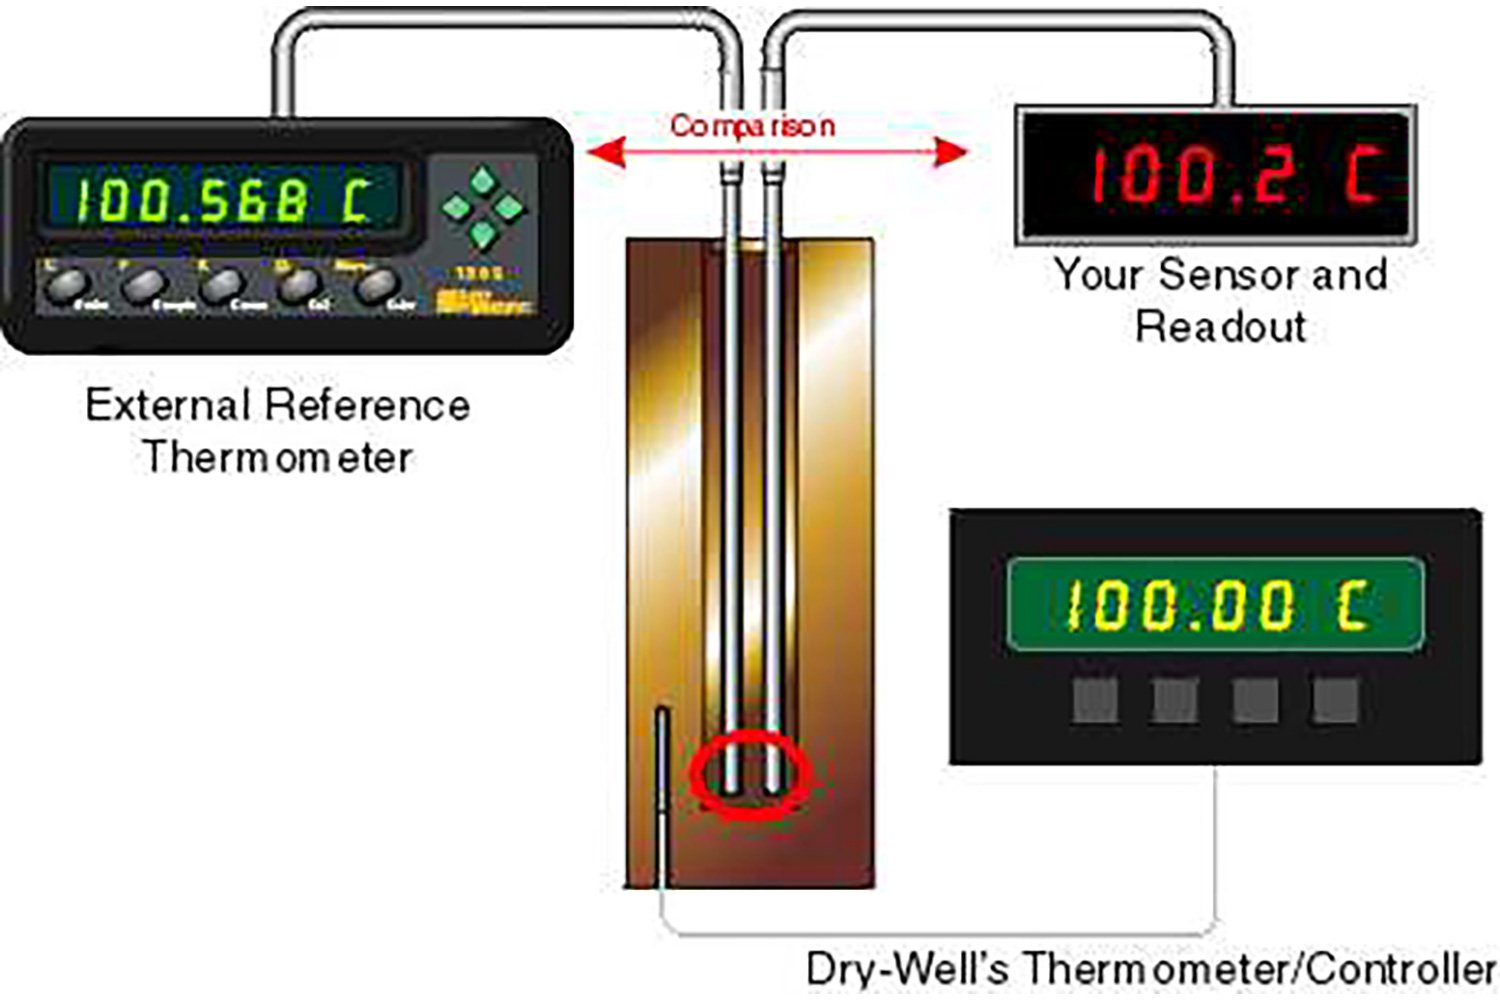 Some Fluke Calibration Dry-well models have space for an additional, external reference thermometer to be placed close to the sensor you’re testing for comparison.